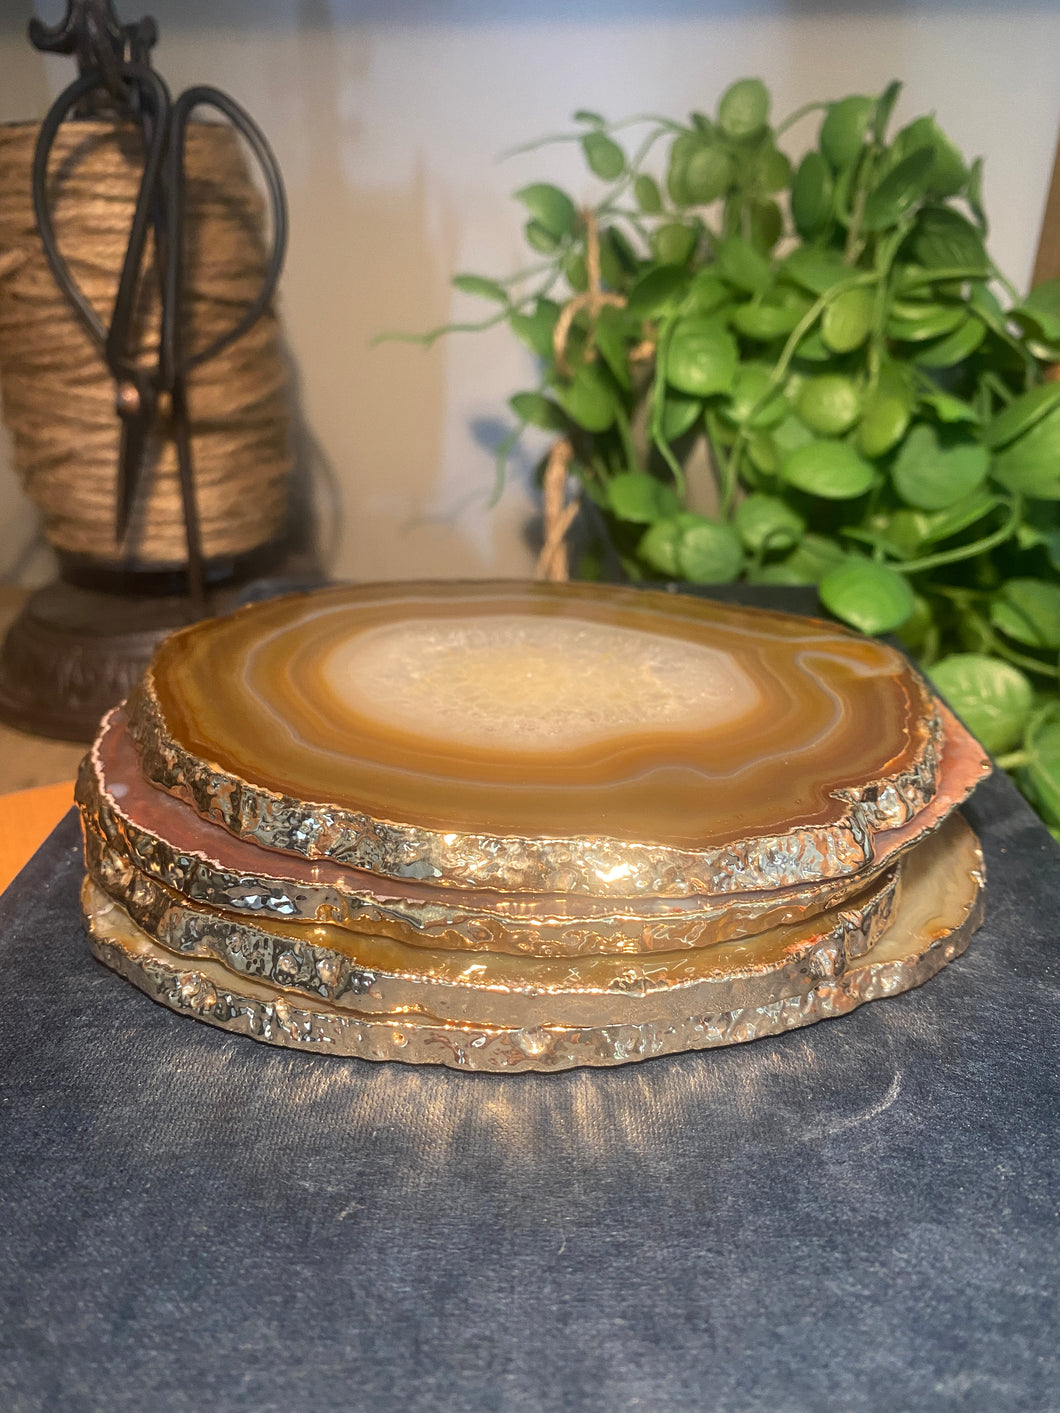 Set of 4 Natural polished Agate Slice drink coasters with Gold Electroplating around the edges